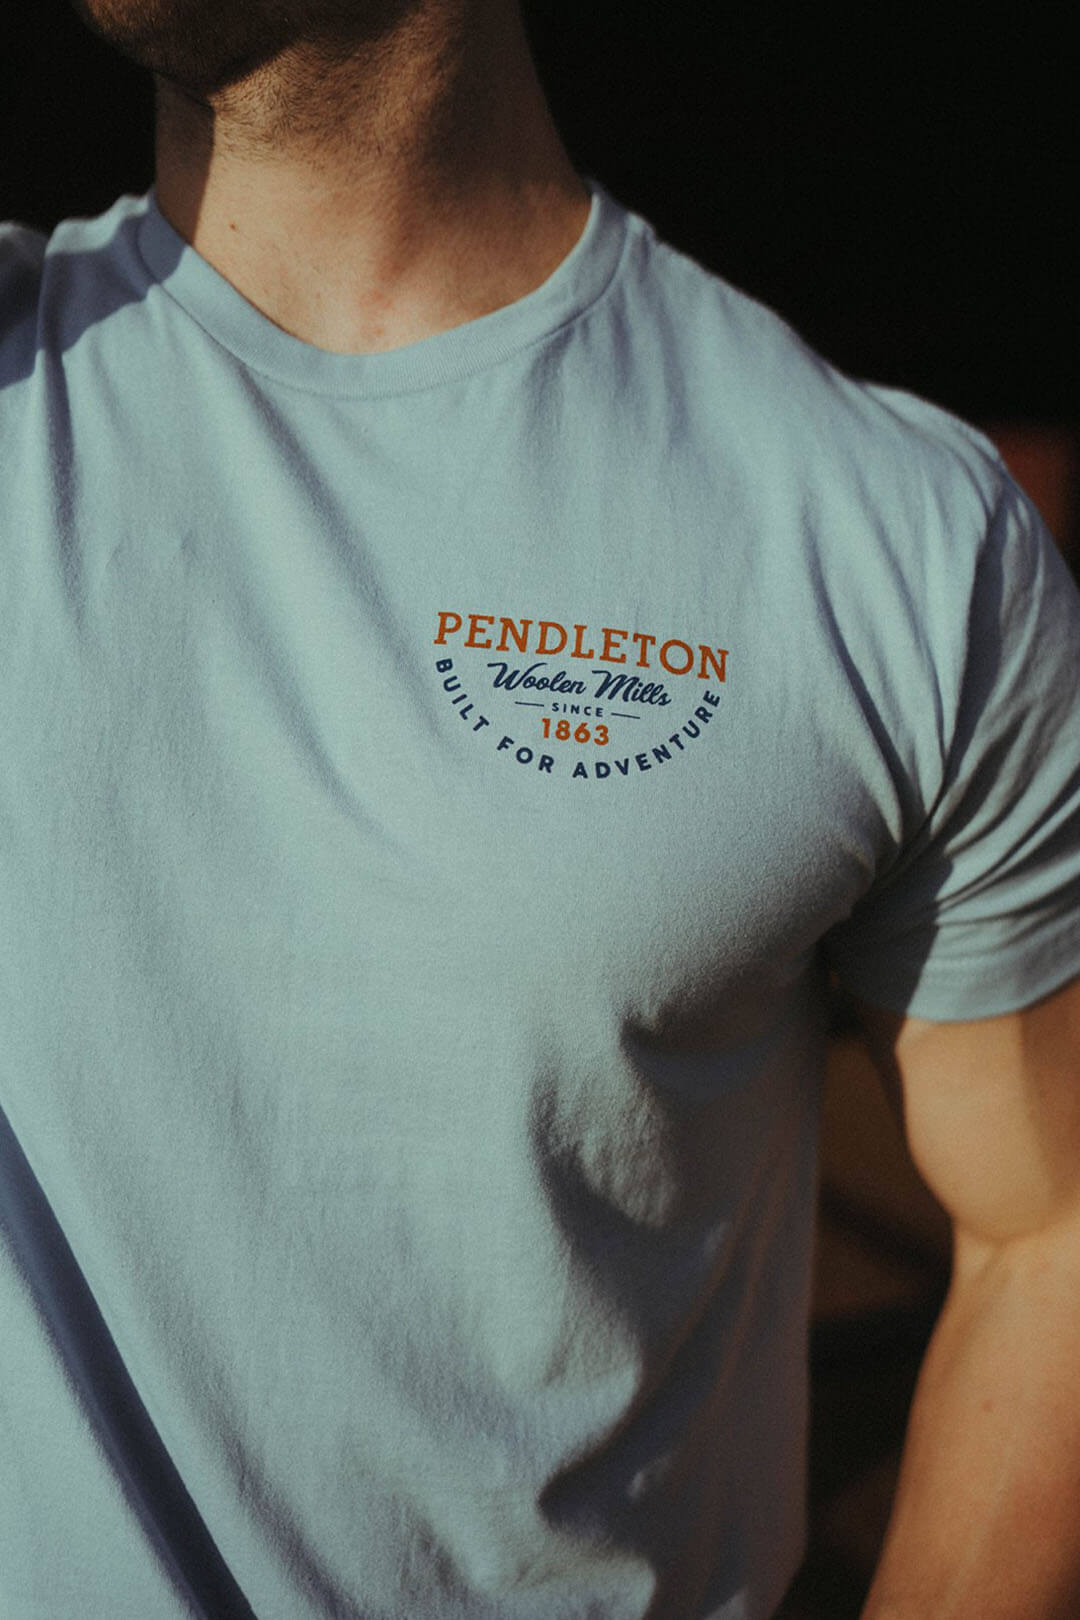 Picture showing the Pendleton logo with "woolen mills since 1863 " written on it and underneath " Built for Adventure"